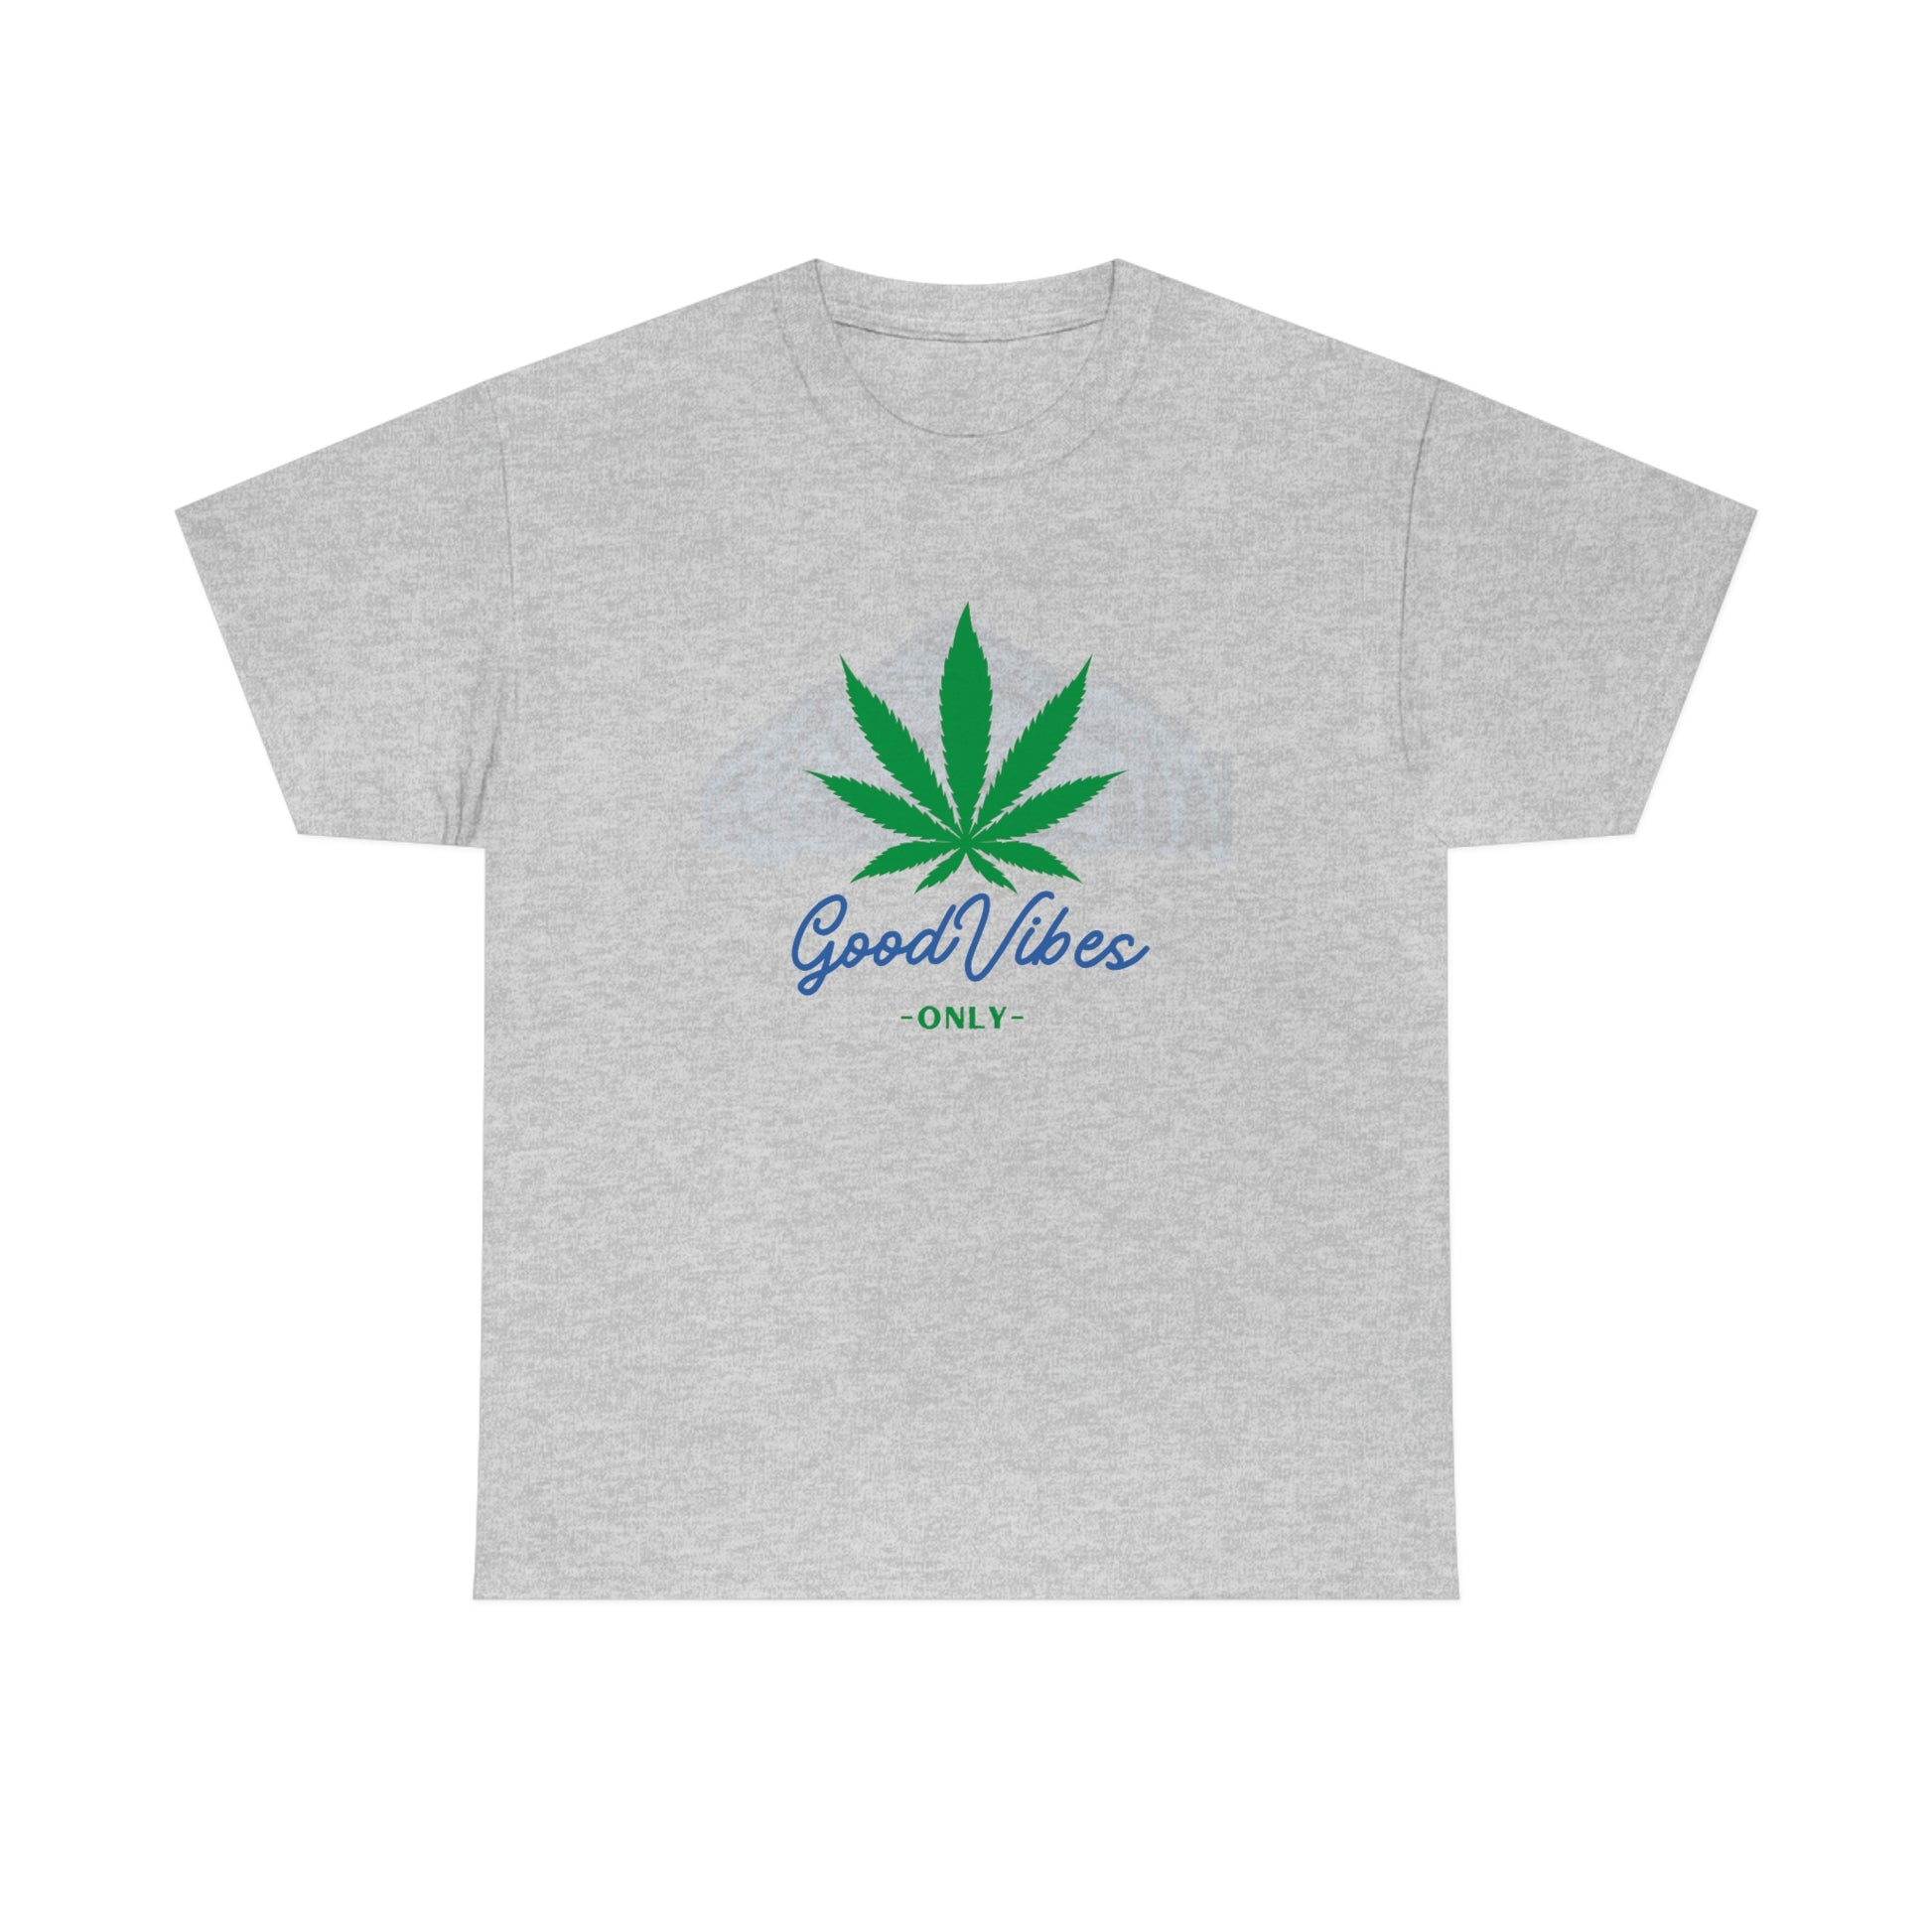 A Good Vibes Only Mountain Tee with the word good vibes on it.